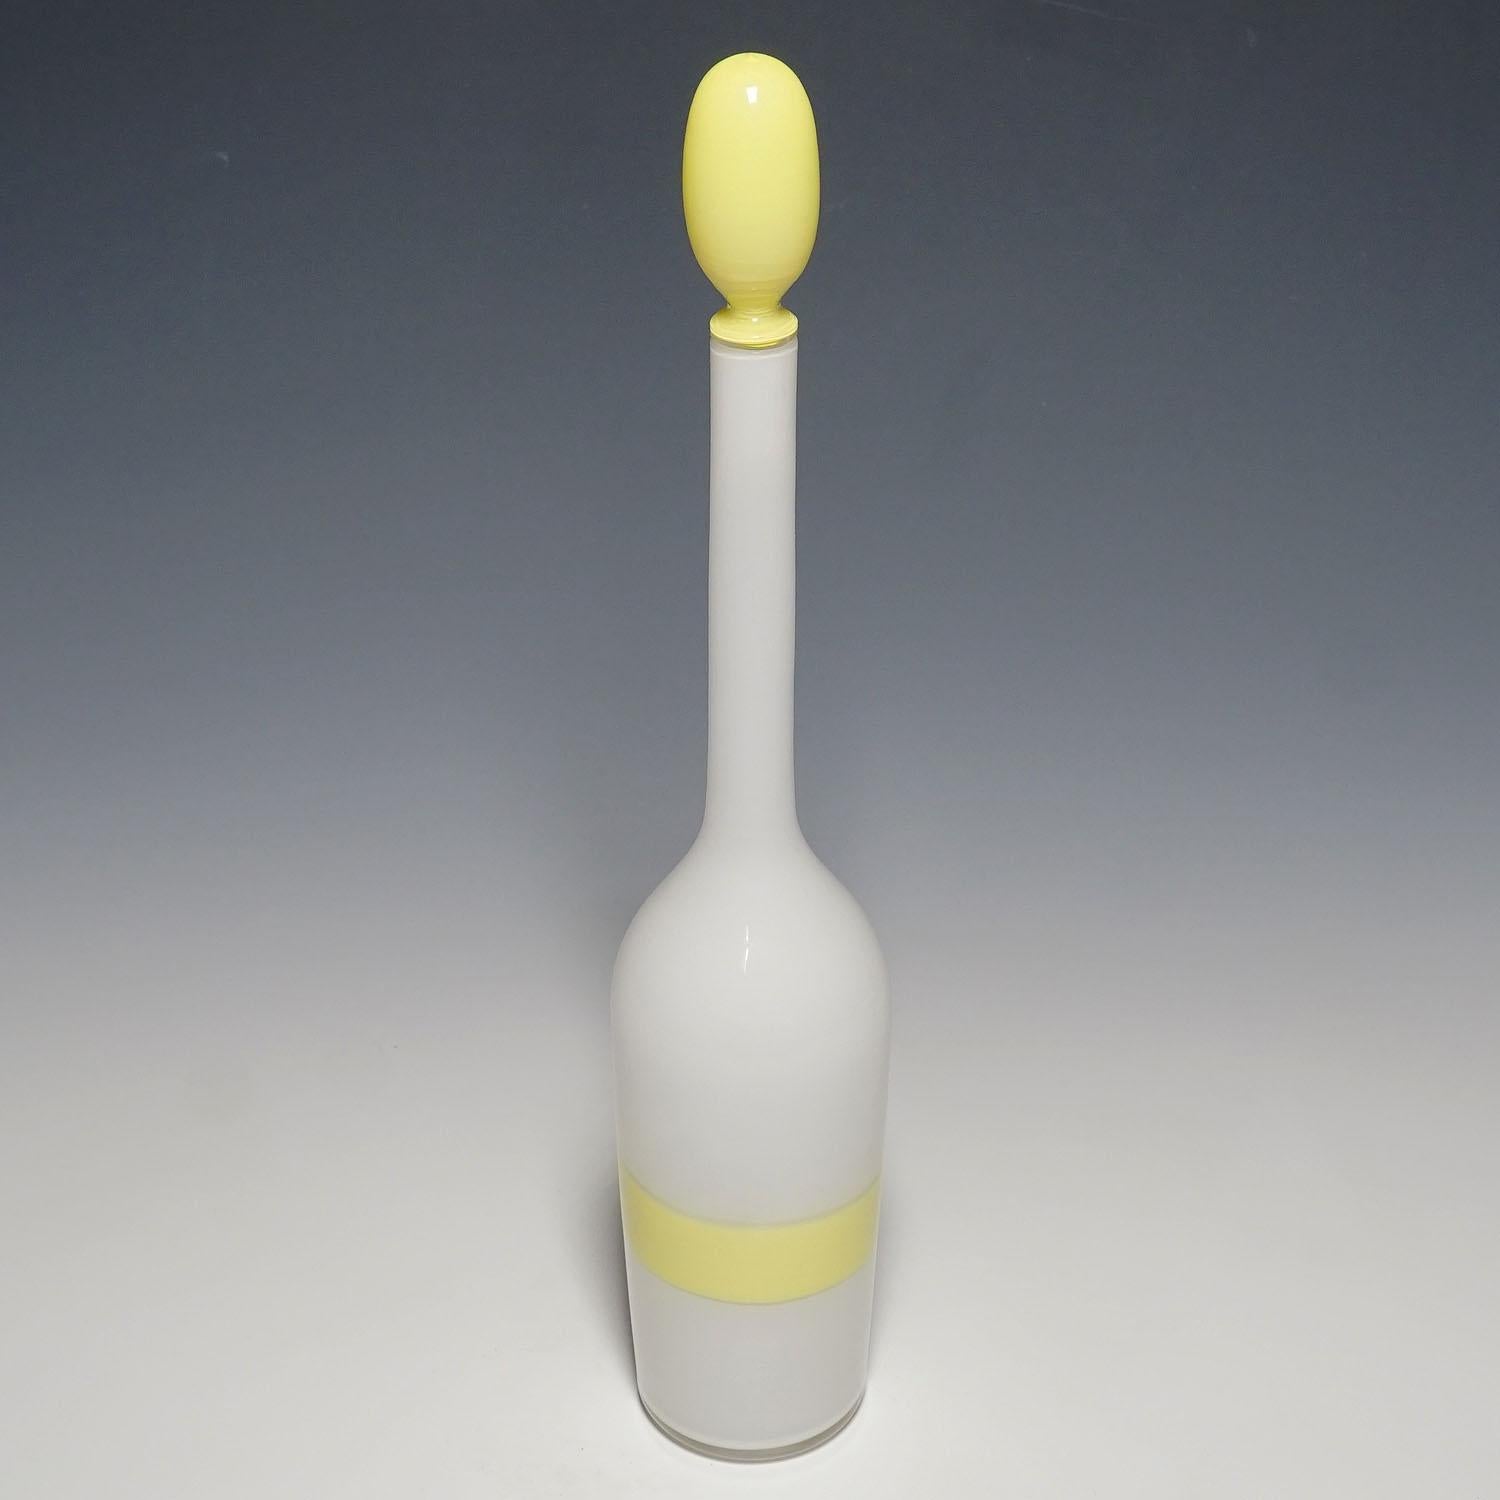 Italian Venini Art Glass Bottle with Fasce Decoration in Yellow, Murano 1950s For Sale